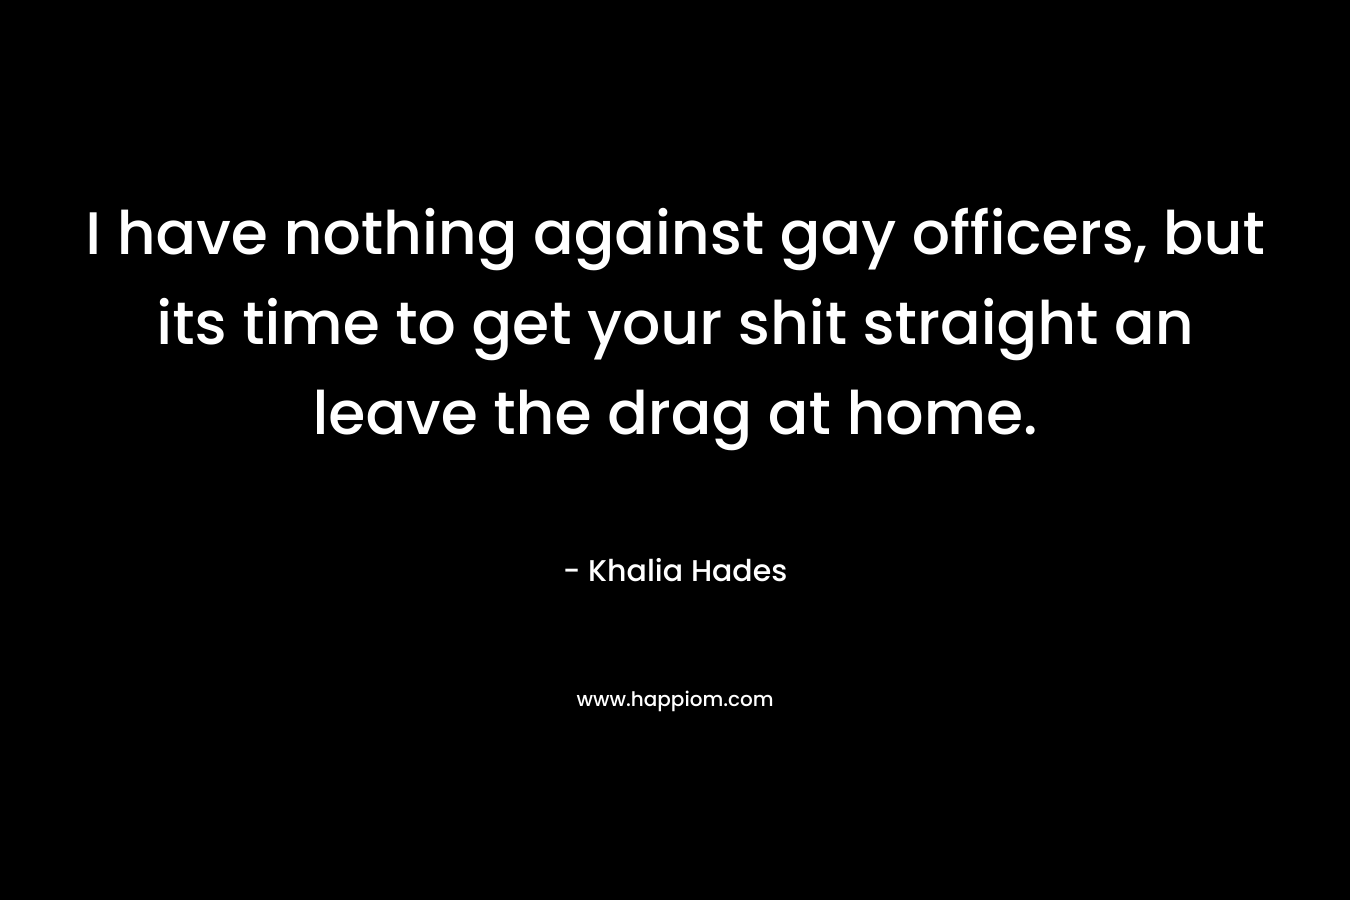 I have nothing against gay officers, but its time to get your shit straight an leave the drag at home. – Khalia Hades